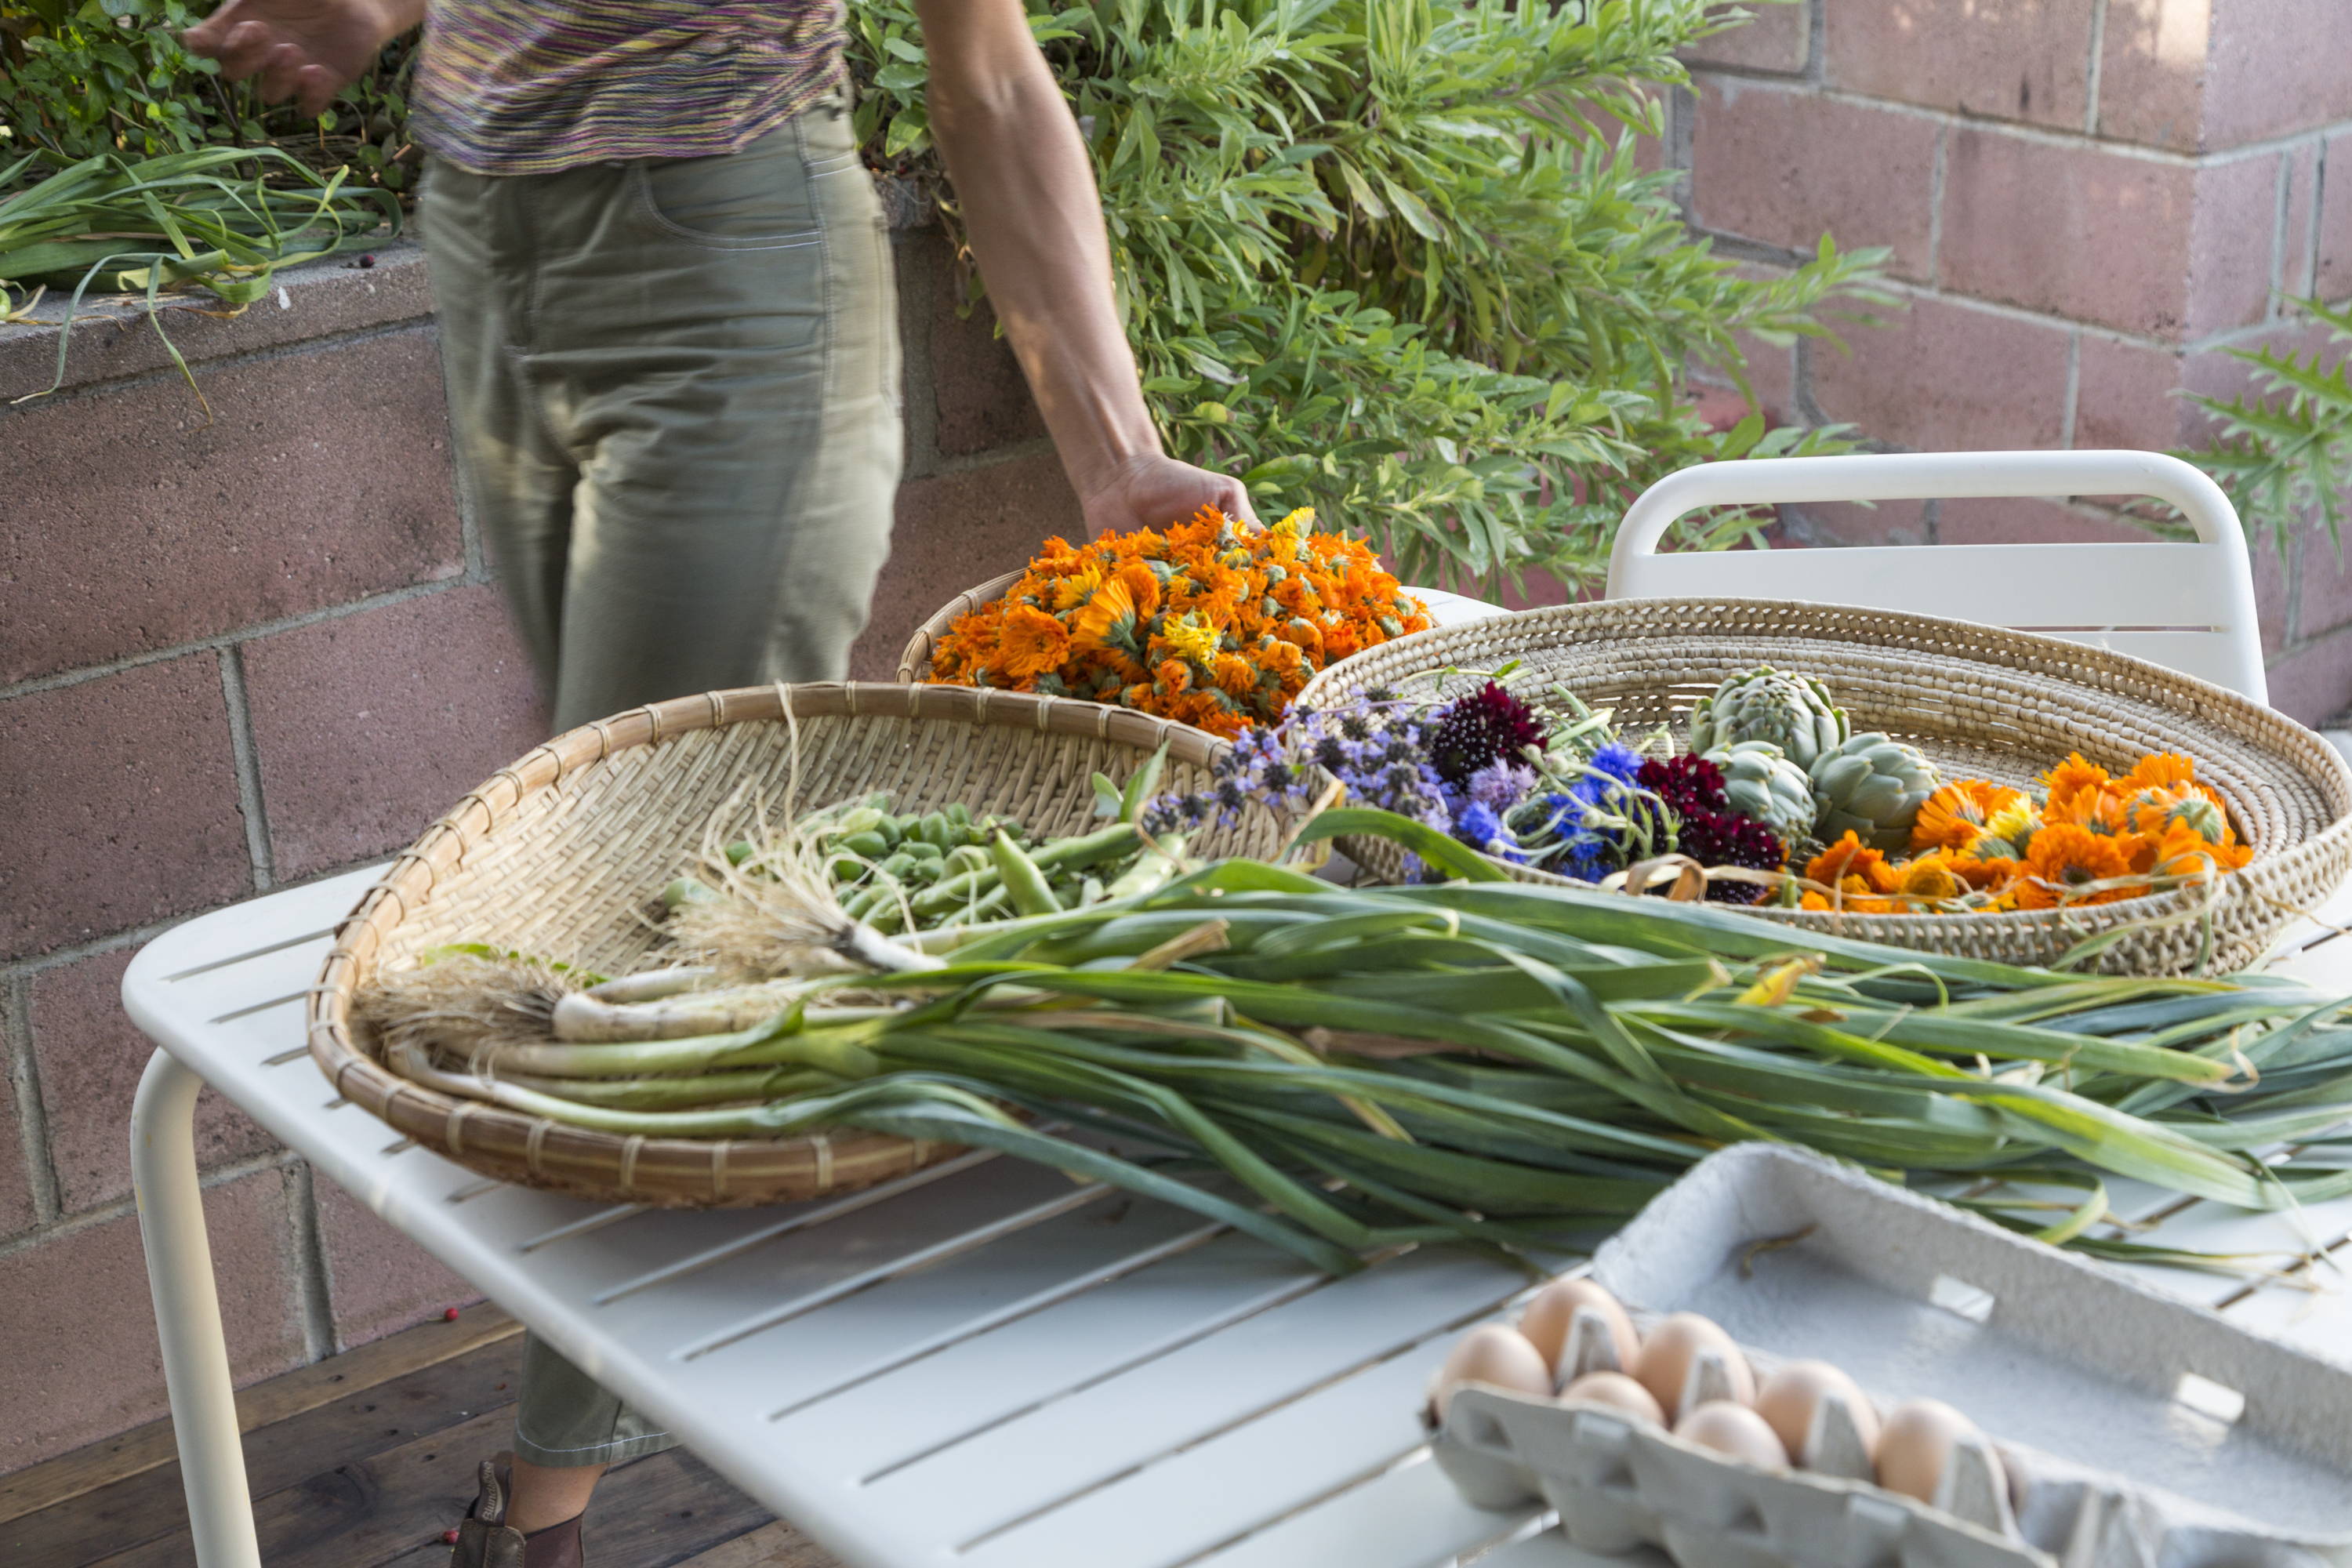 Fresh produce spread out on white Floyd patio table